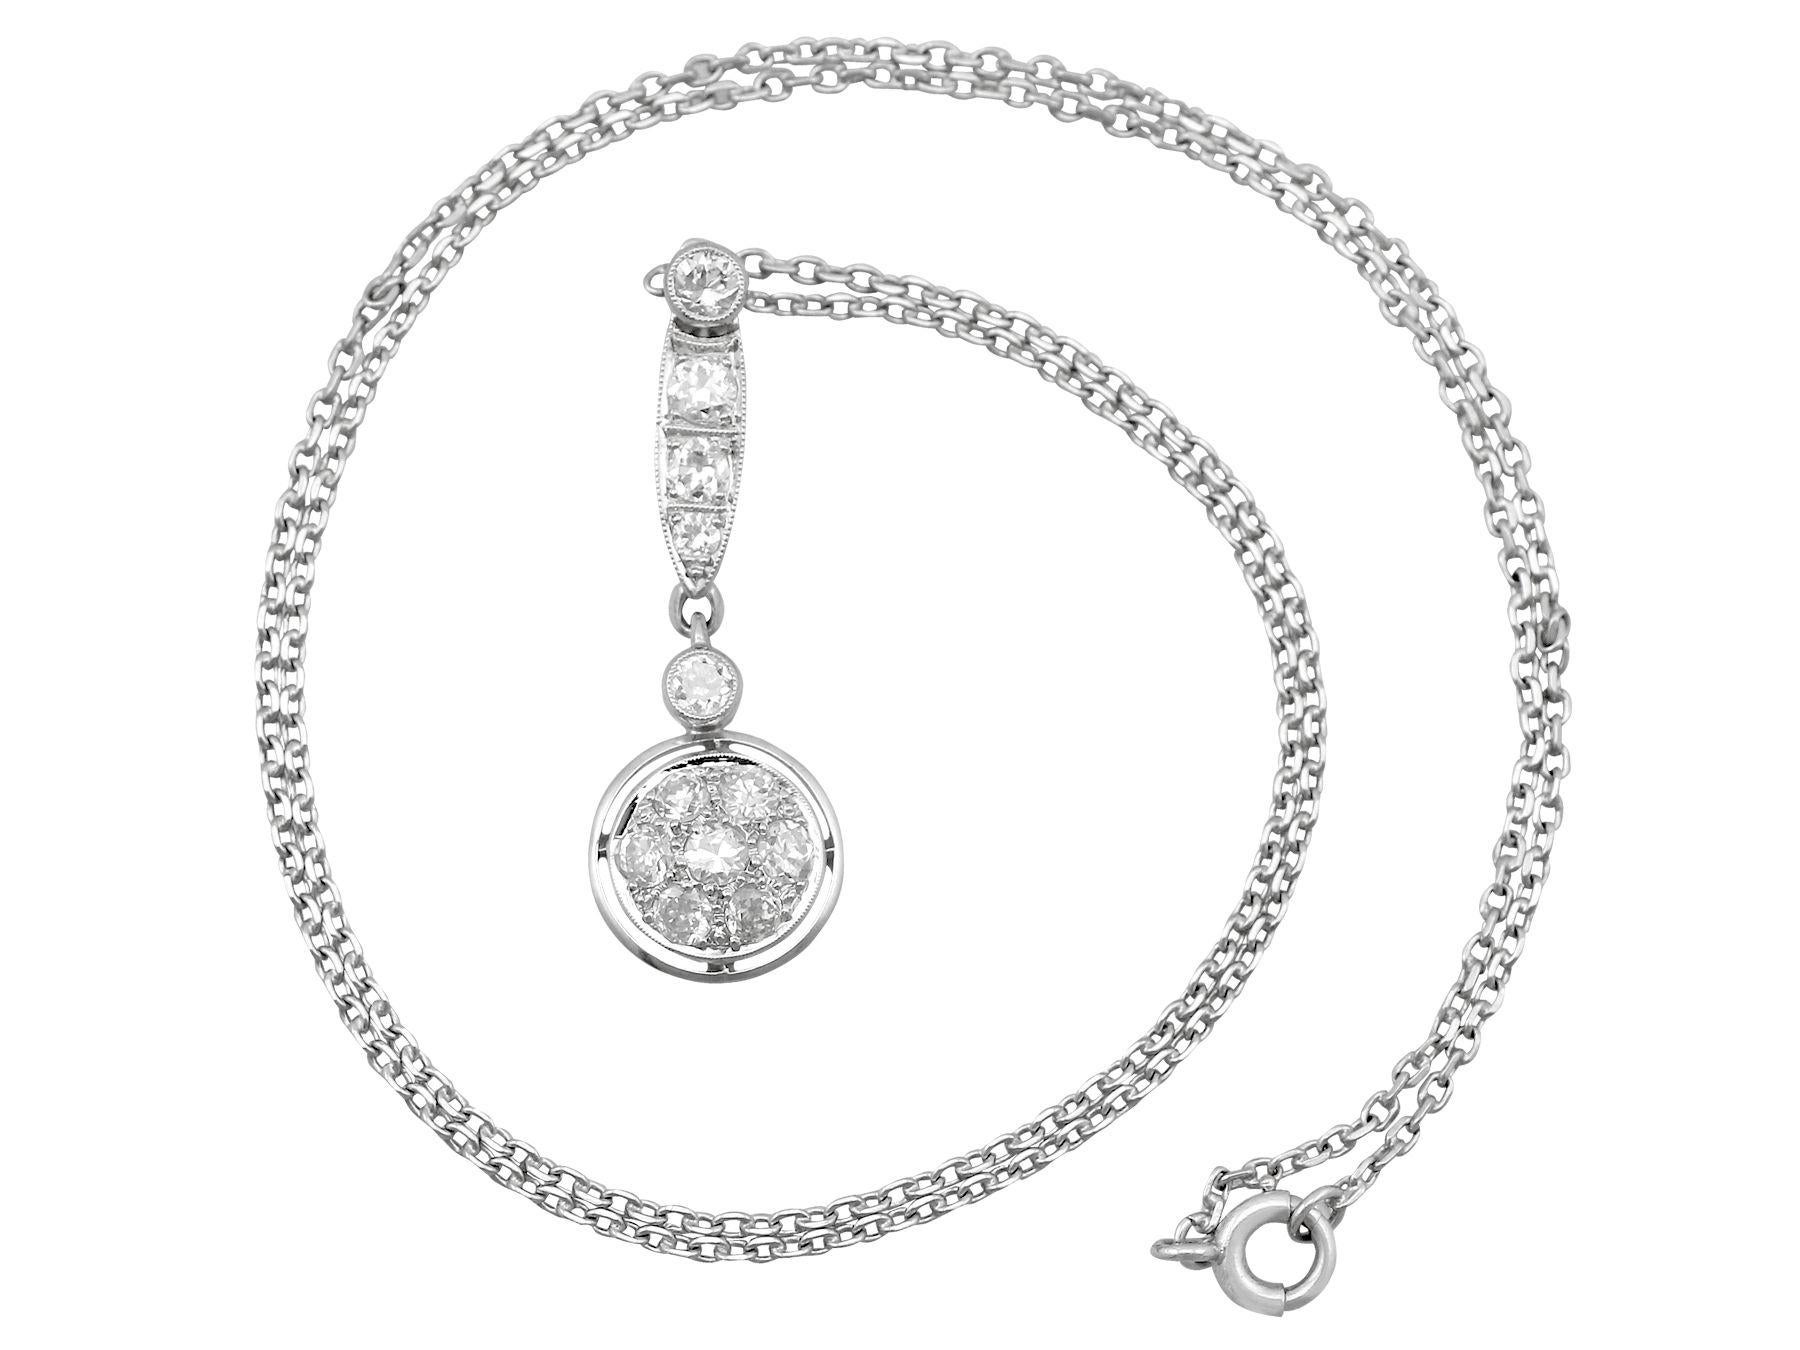 This fine and impressive antique diamond necklace has been crafted in platinum.

The pierced decorated linear drop is ornamented to the lower border with a circular frame, embellished with seven pavé set Old European round cut diamonds, and a single